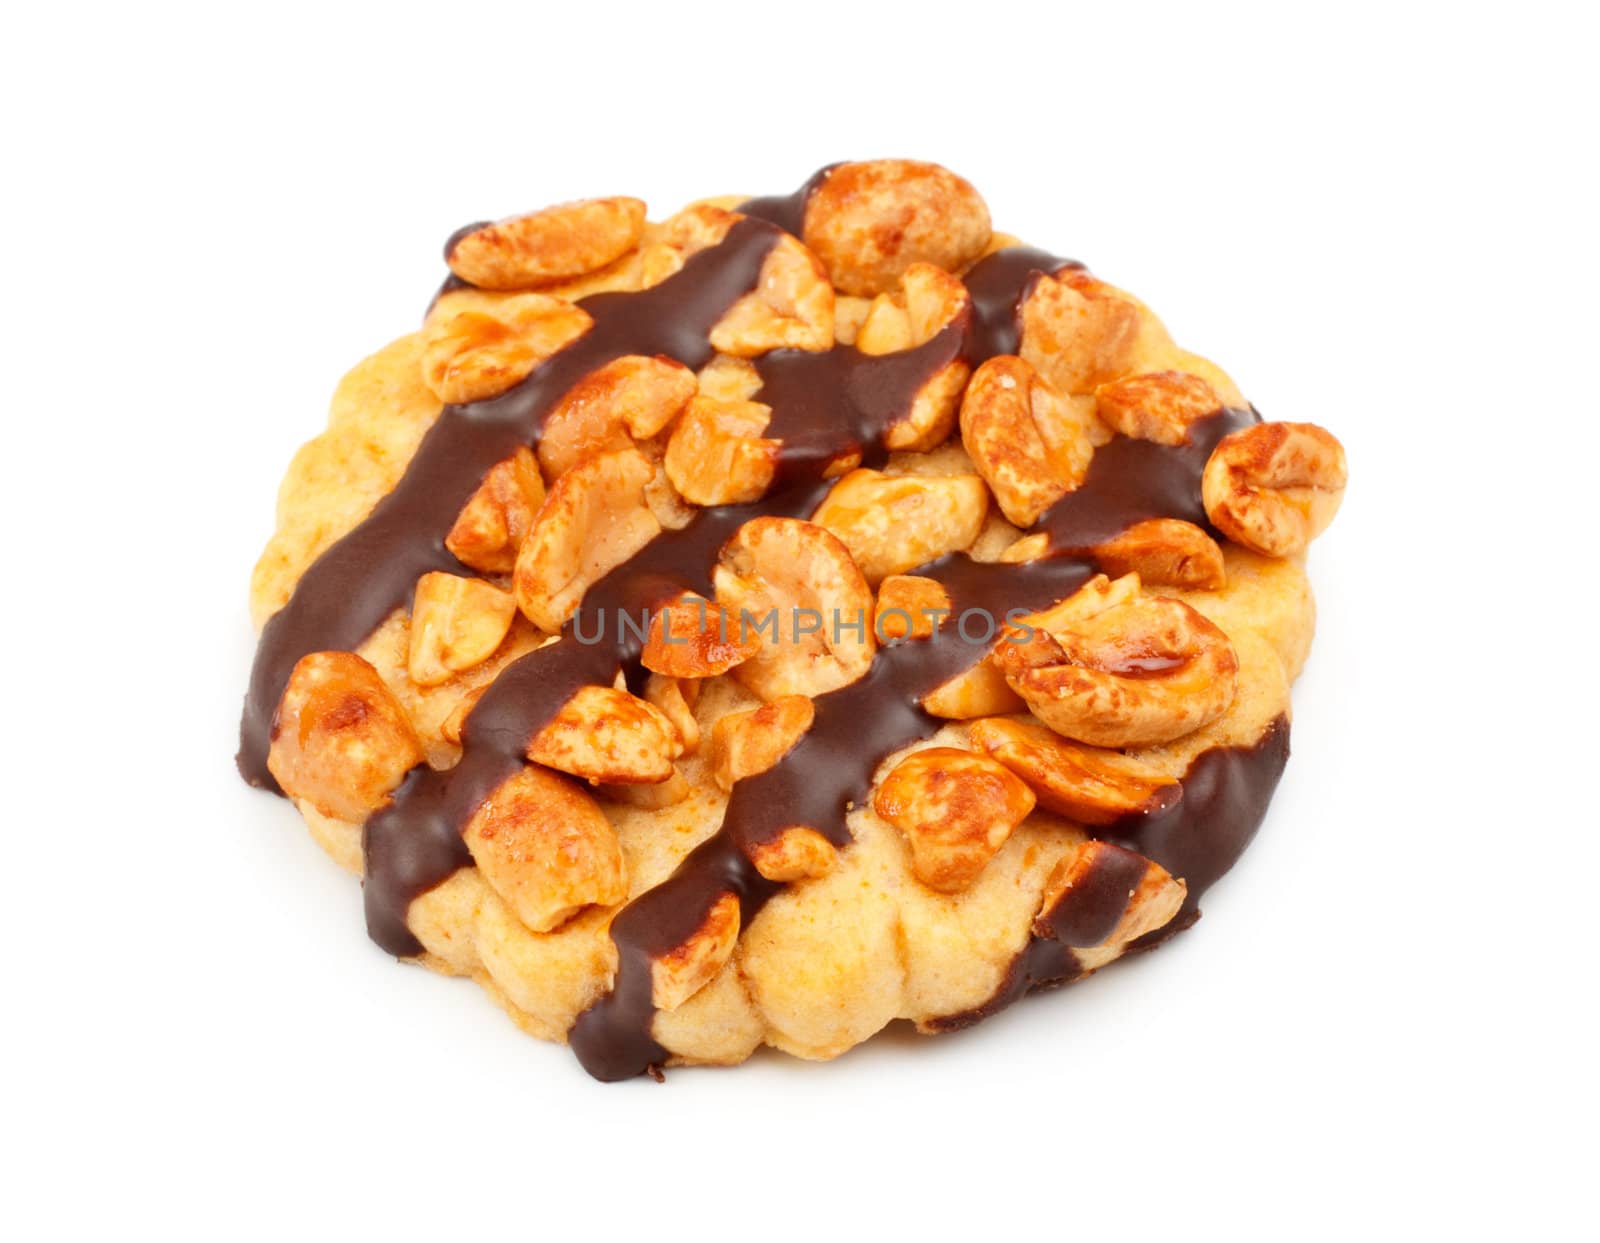 chocolate chip cookies with peanuts, isolated on white